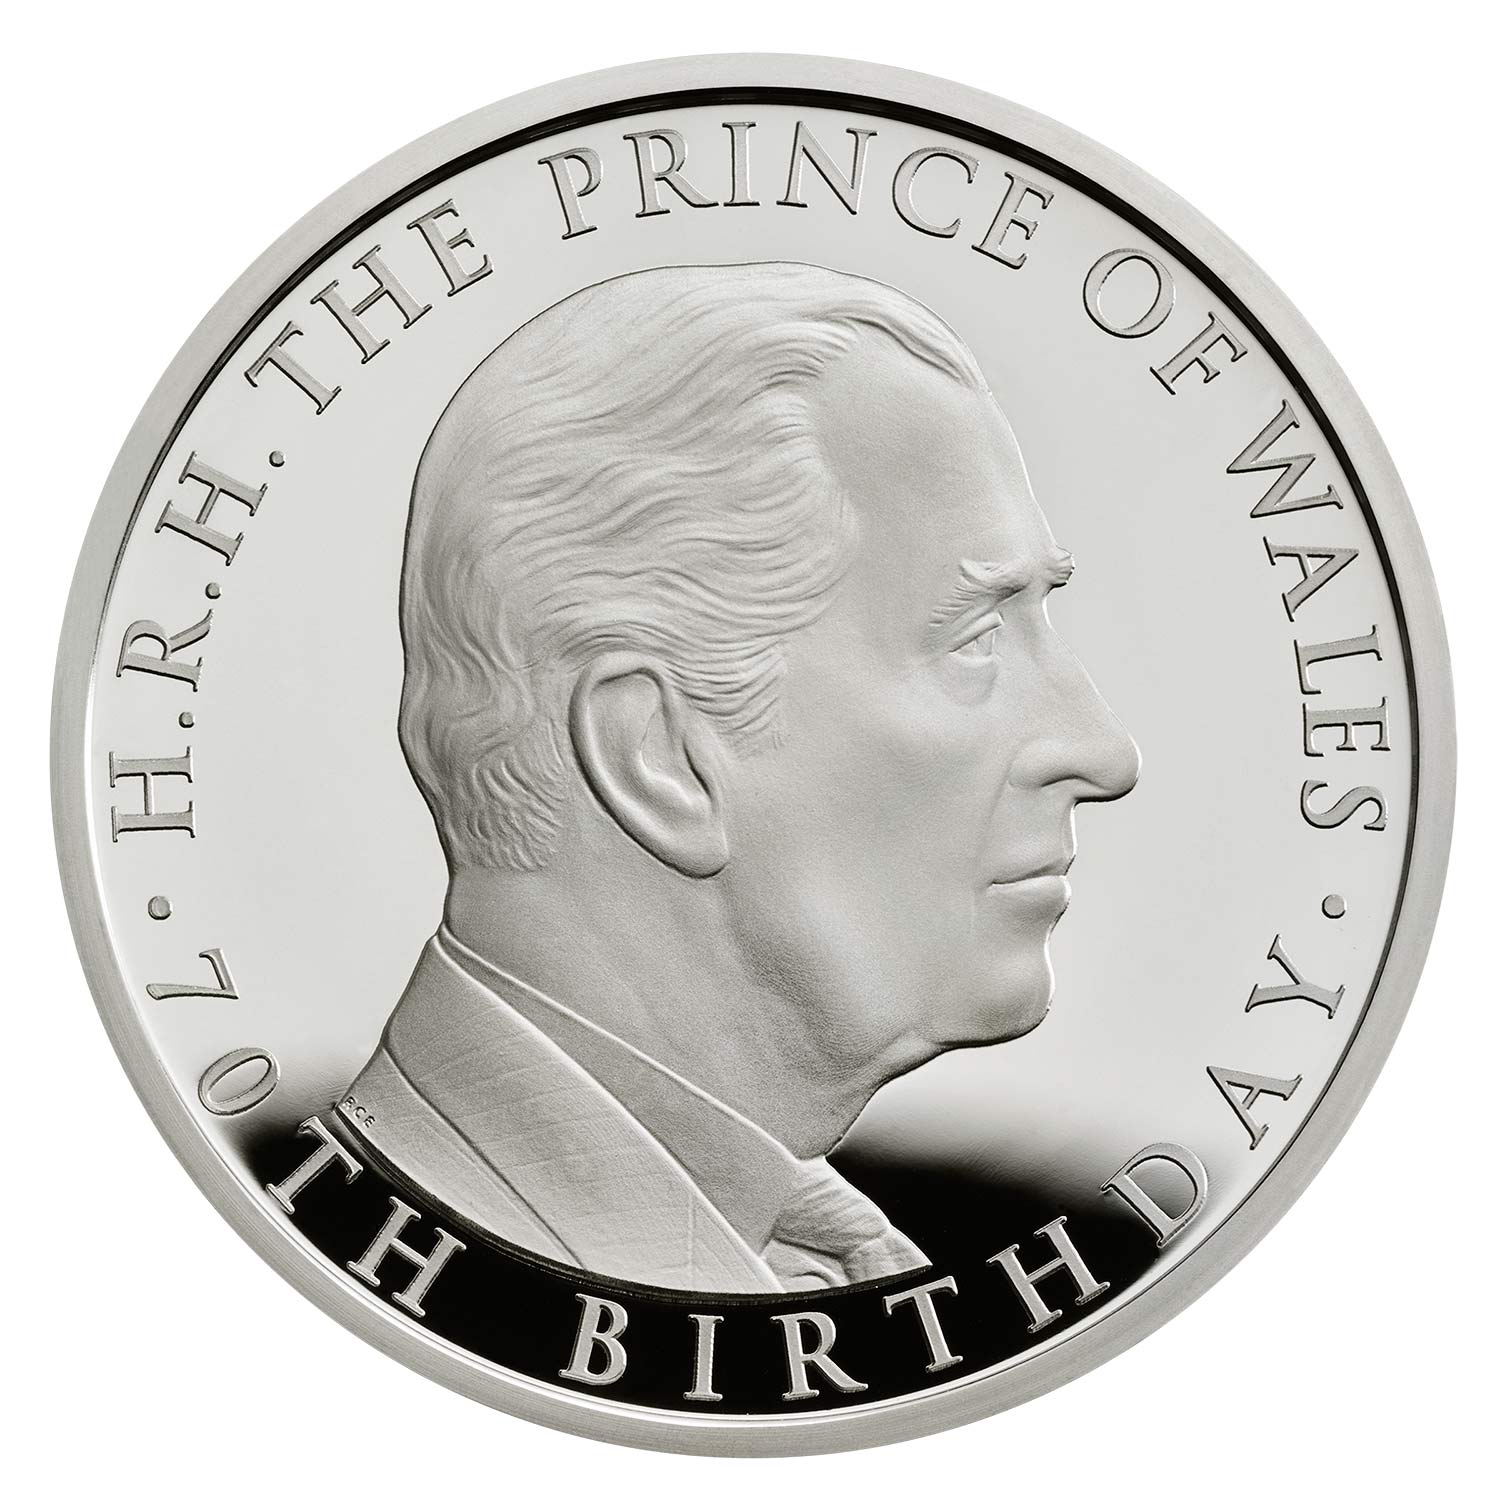 A silver coin with Prince Charles' face engraved on it.